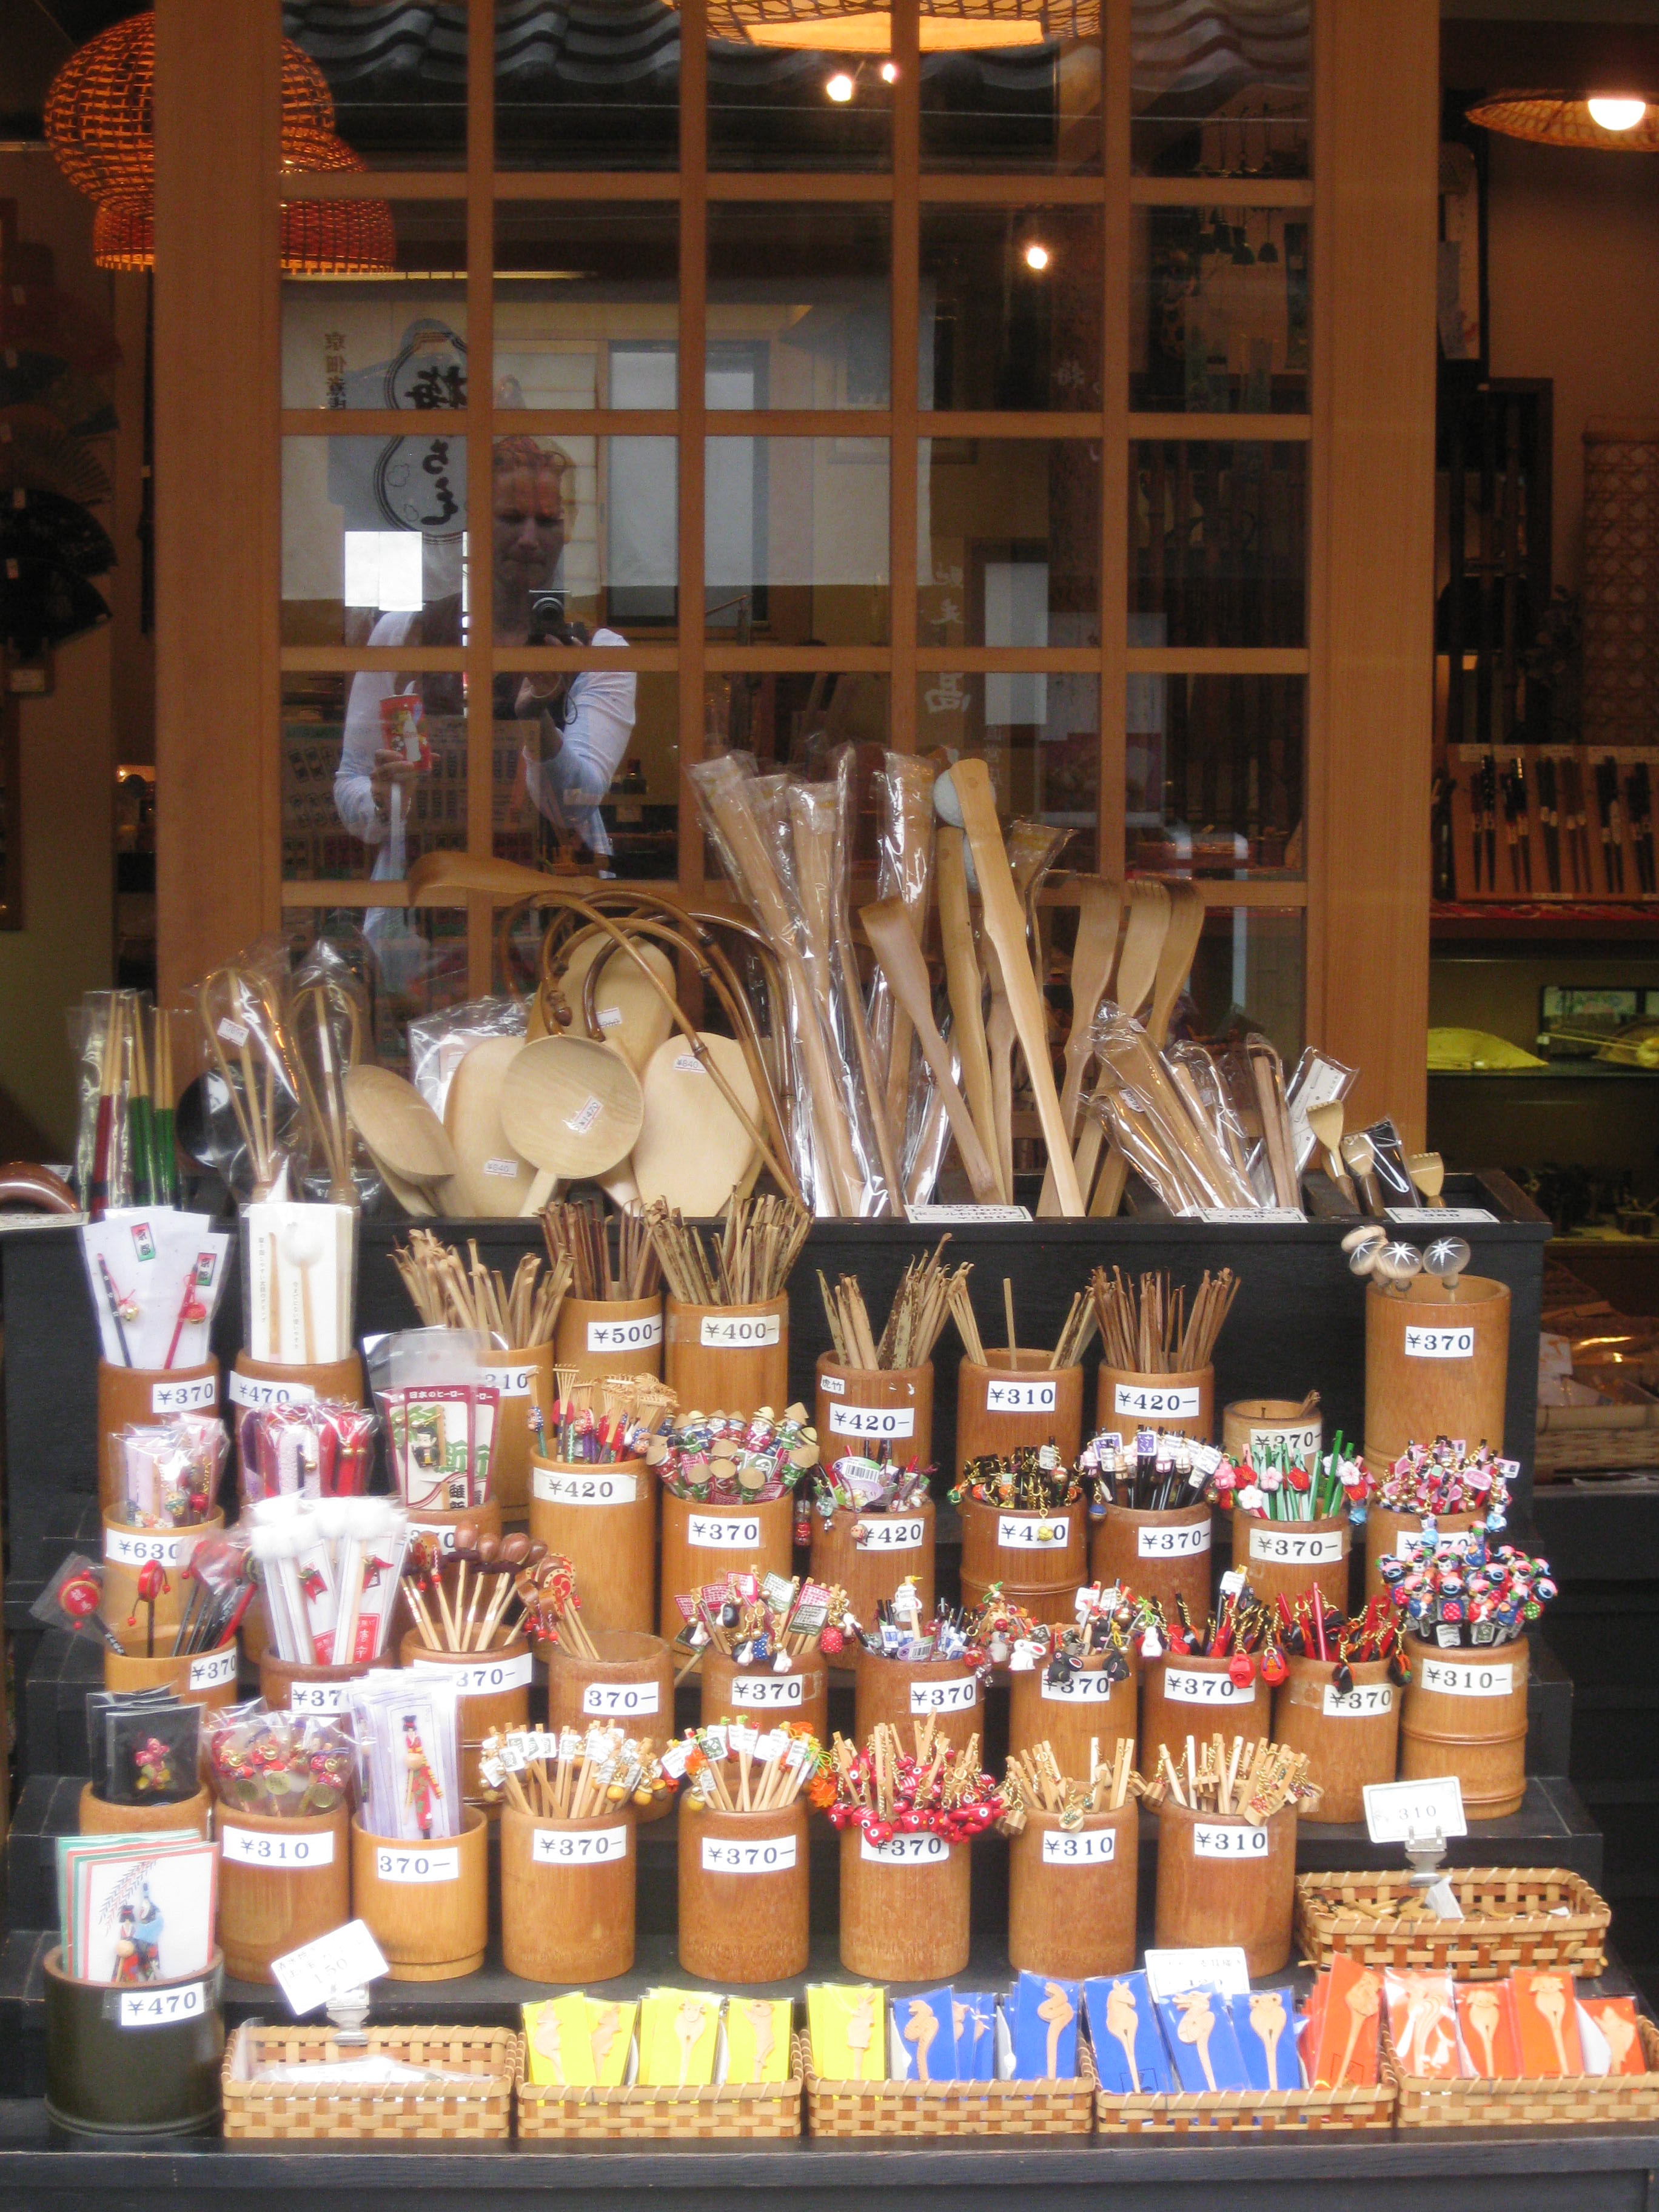 Store front in Kyoto - Display of Incense